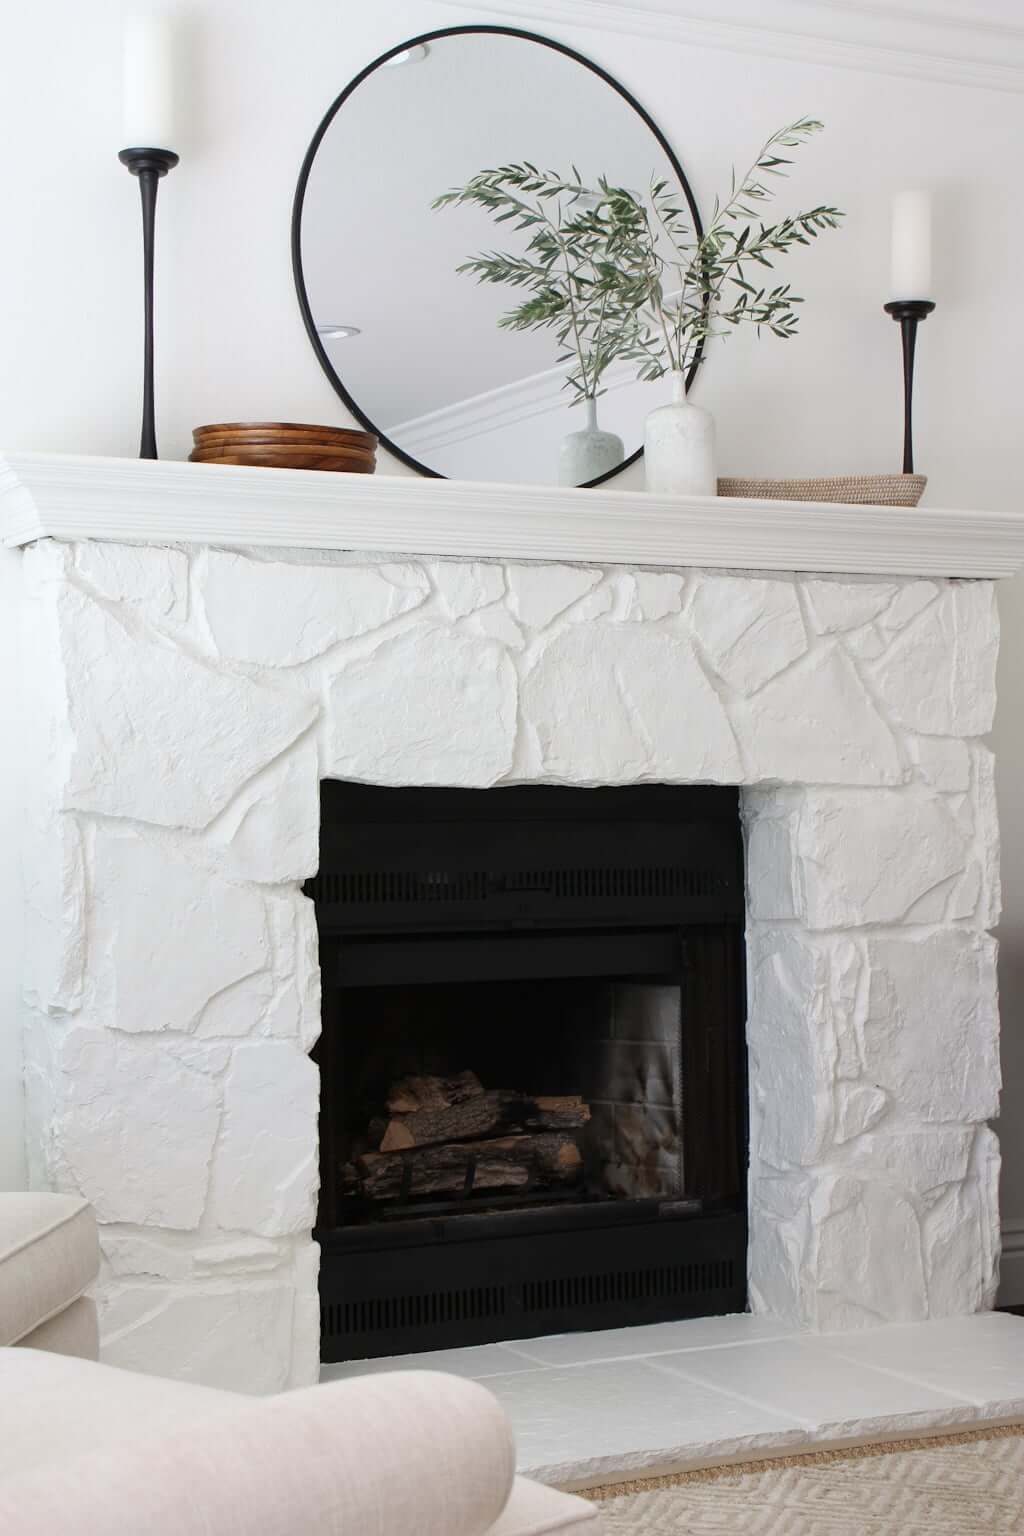 painted white stone fireplace with round mirror above